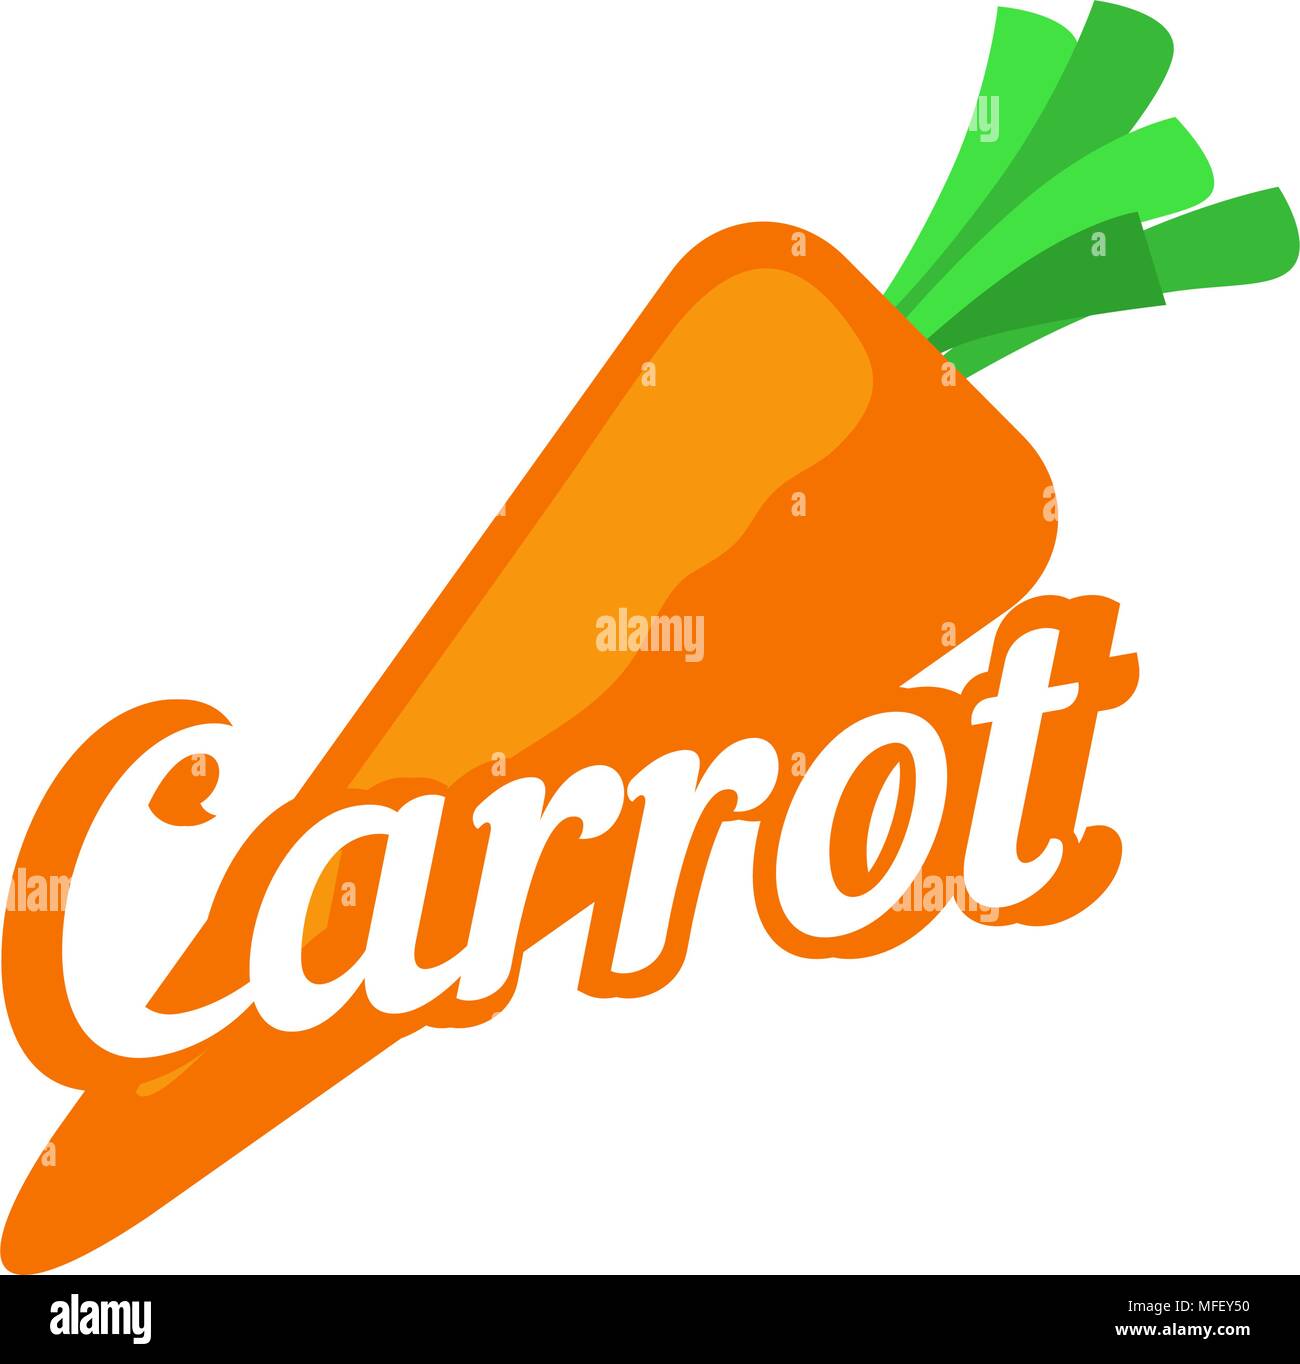 Carrot, image with caption Stock Vector